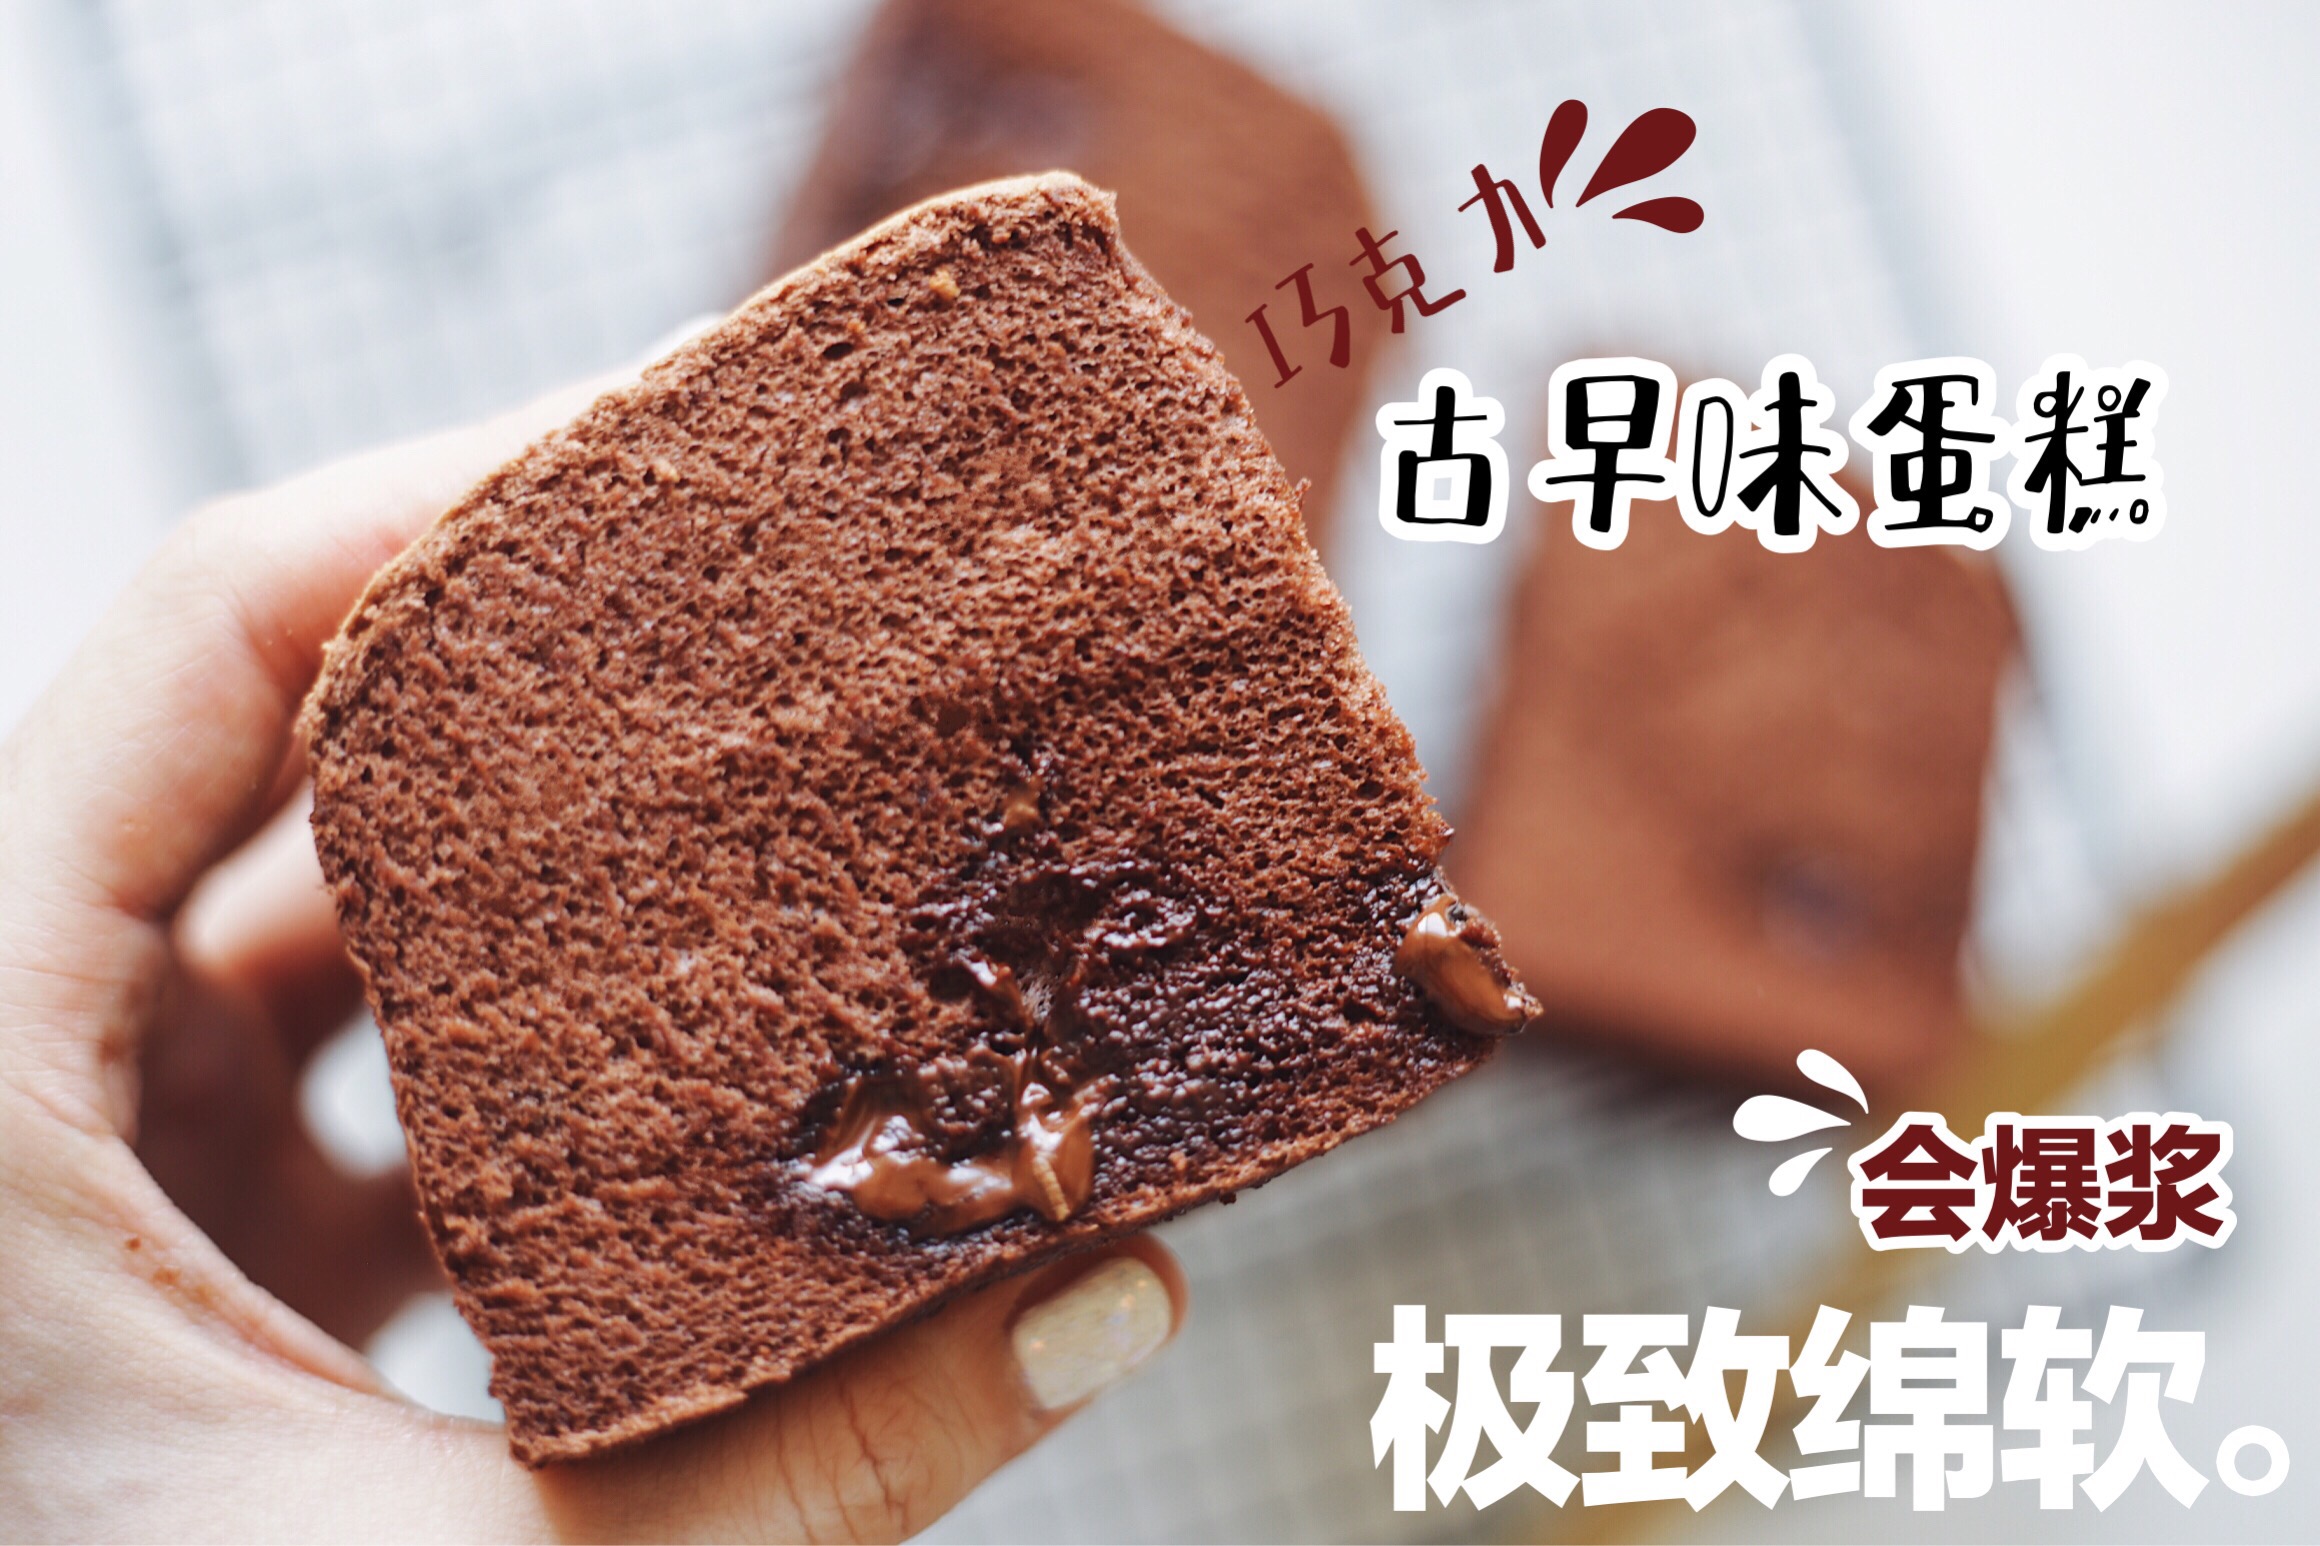 
The measure of practice of practice video _ of cake of flavour of chocolate Gu Zao